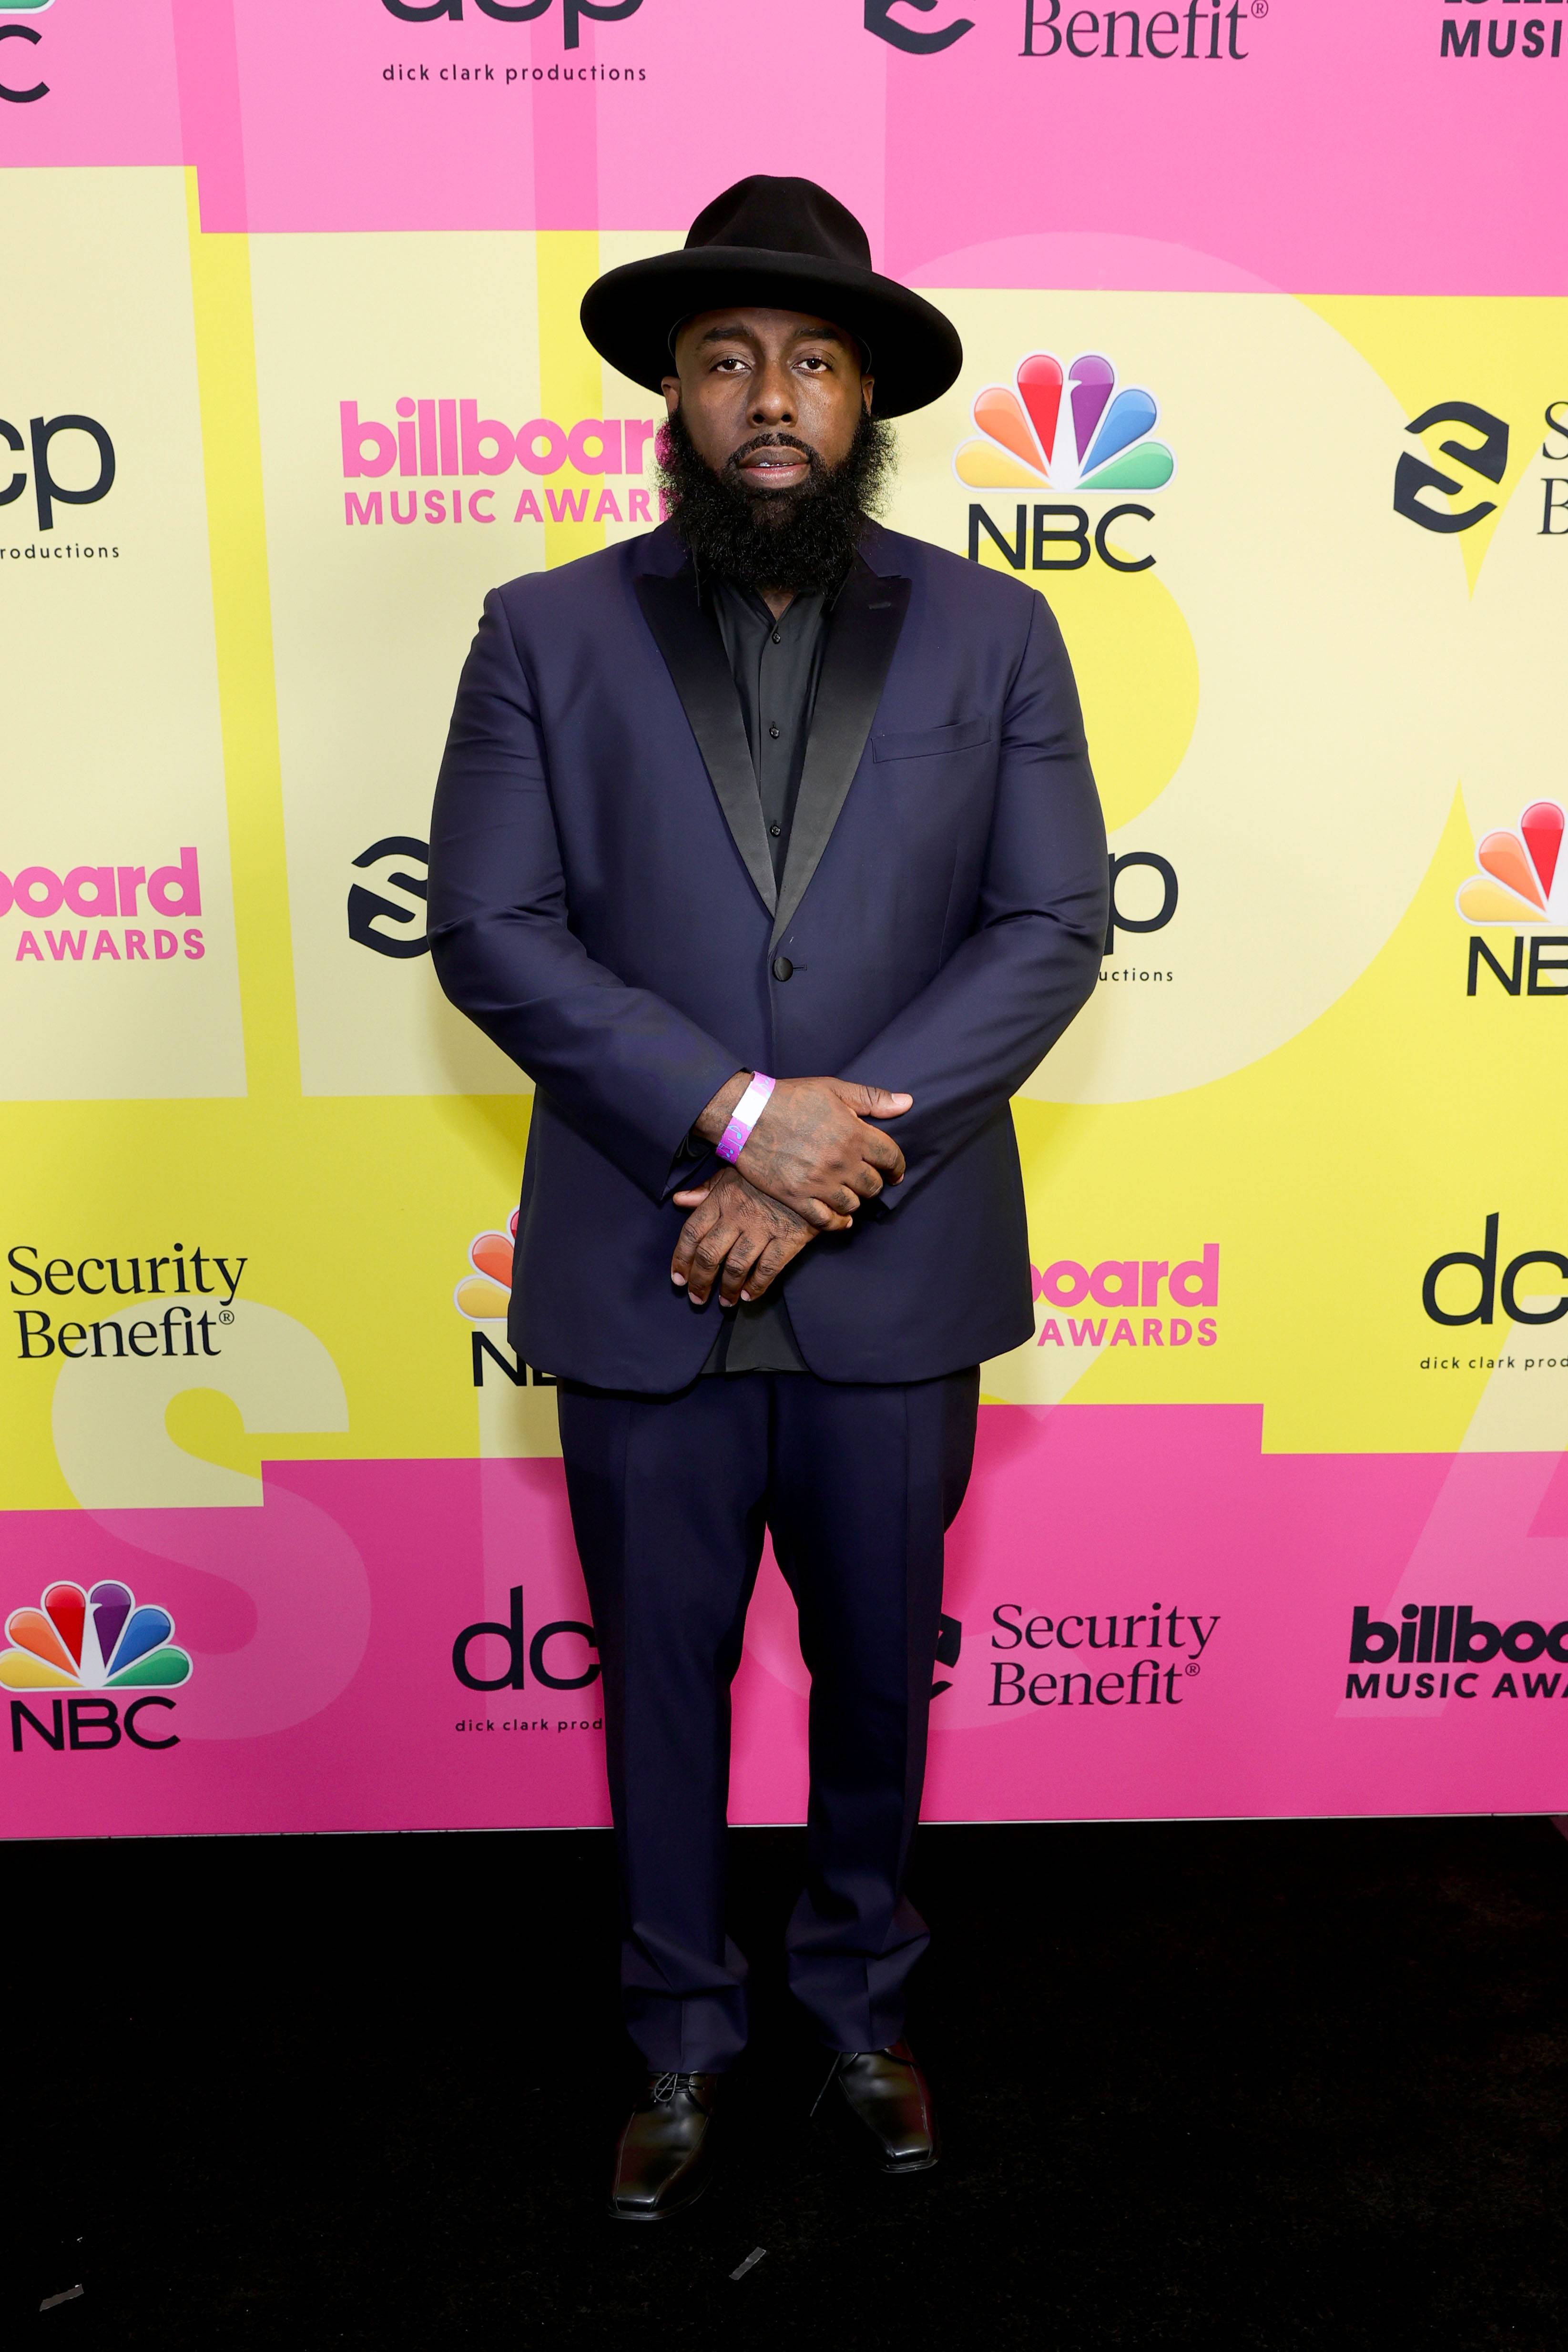 LOS ANGELES, CALIFORNIA - MAY 23: Trae tha Truth poses backstage for the 2021 Billboard Music Awards, broadcast on May 23, 2021 at Microsoft Theater in Los Angeles, California. (Photo by Rich Fury/Getty Images for dcp)